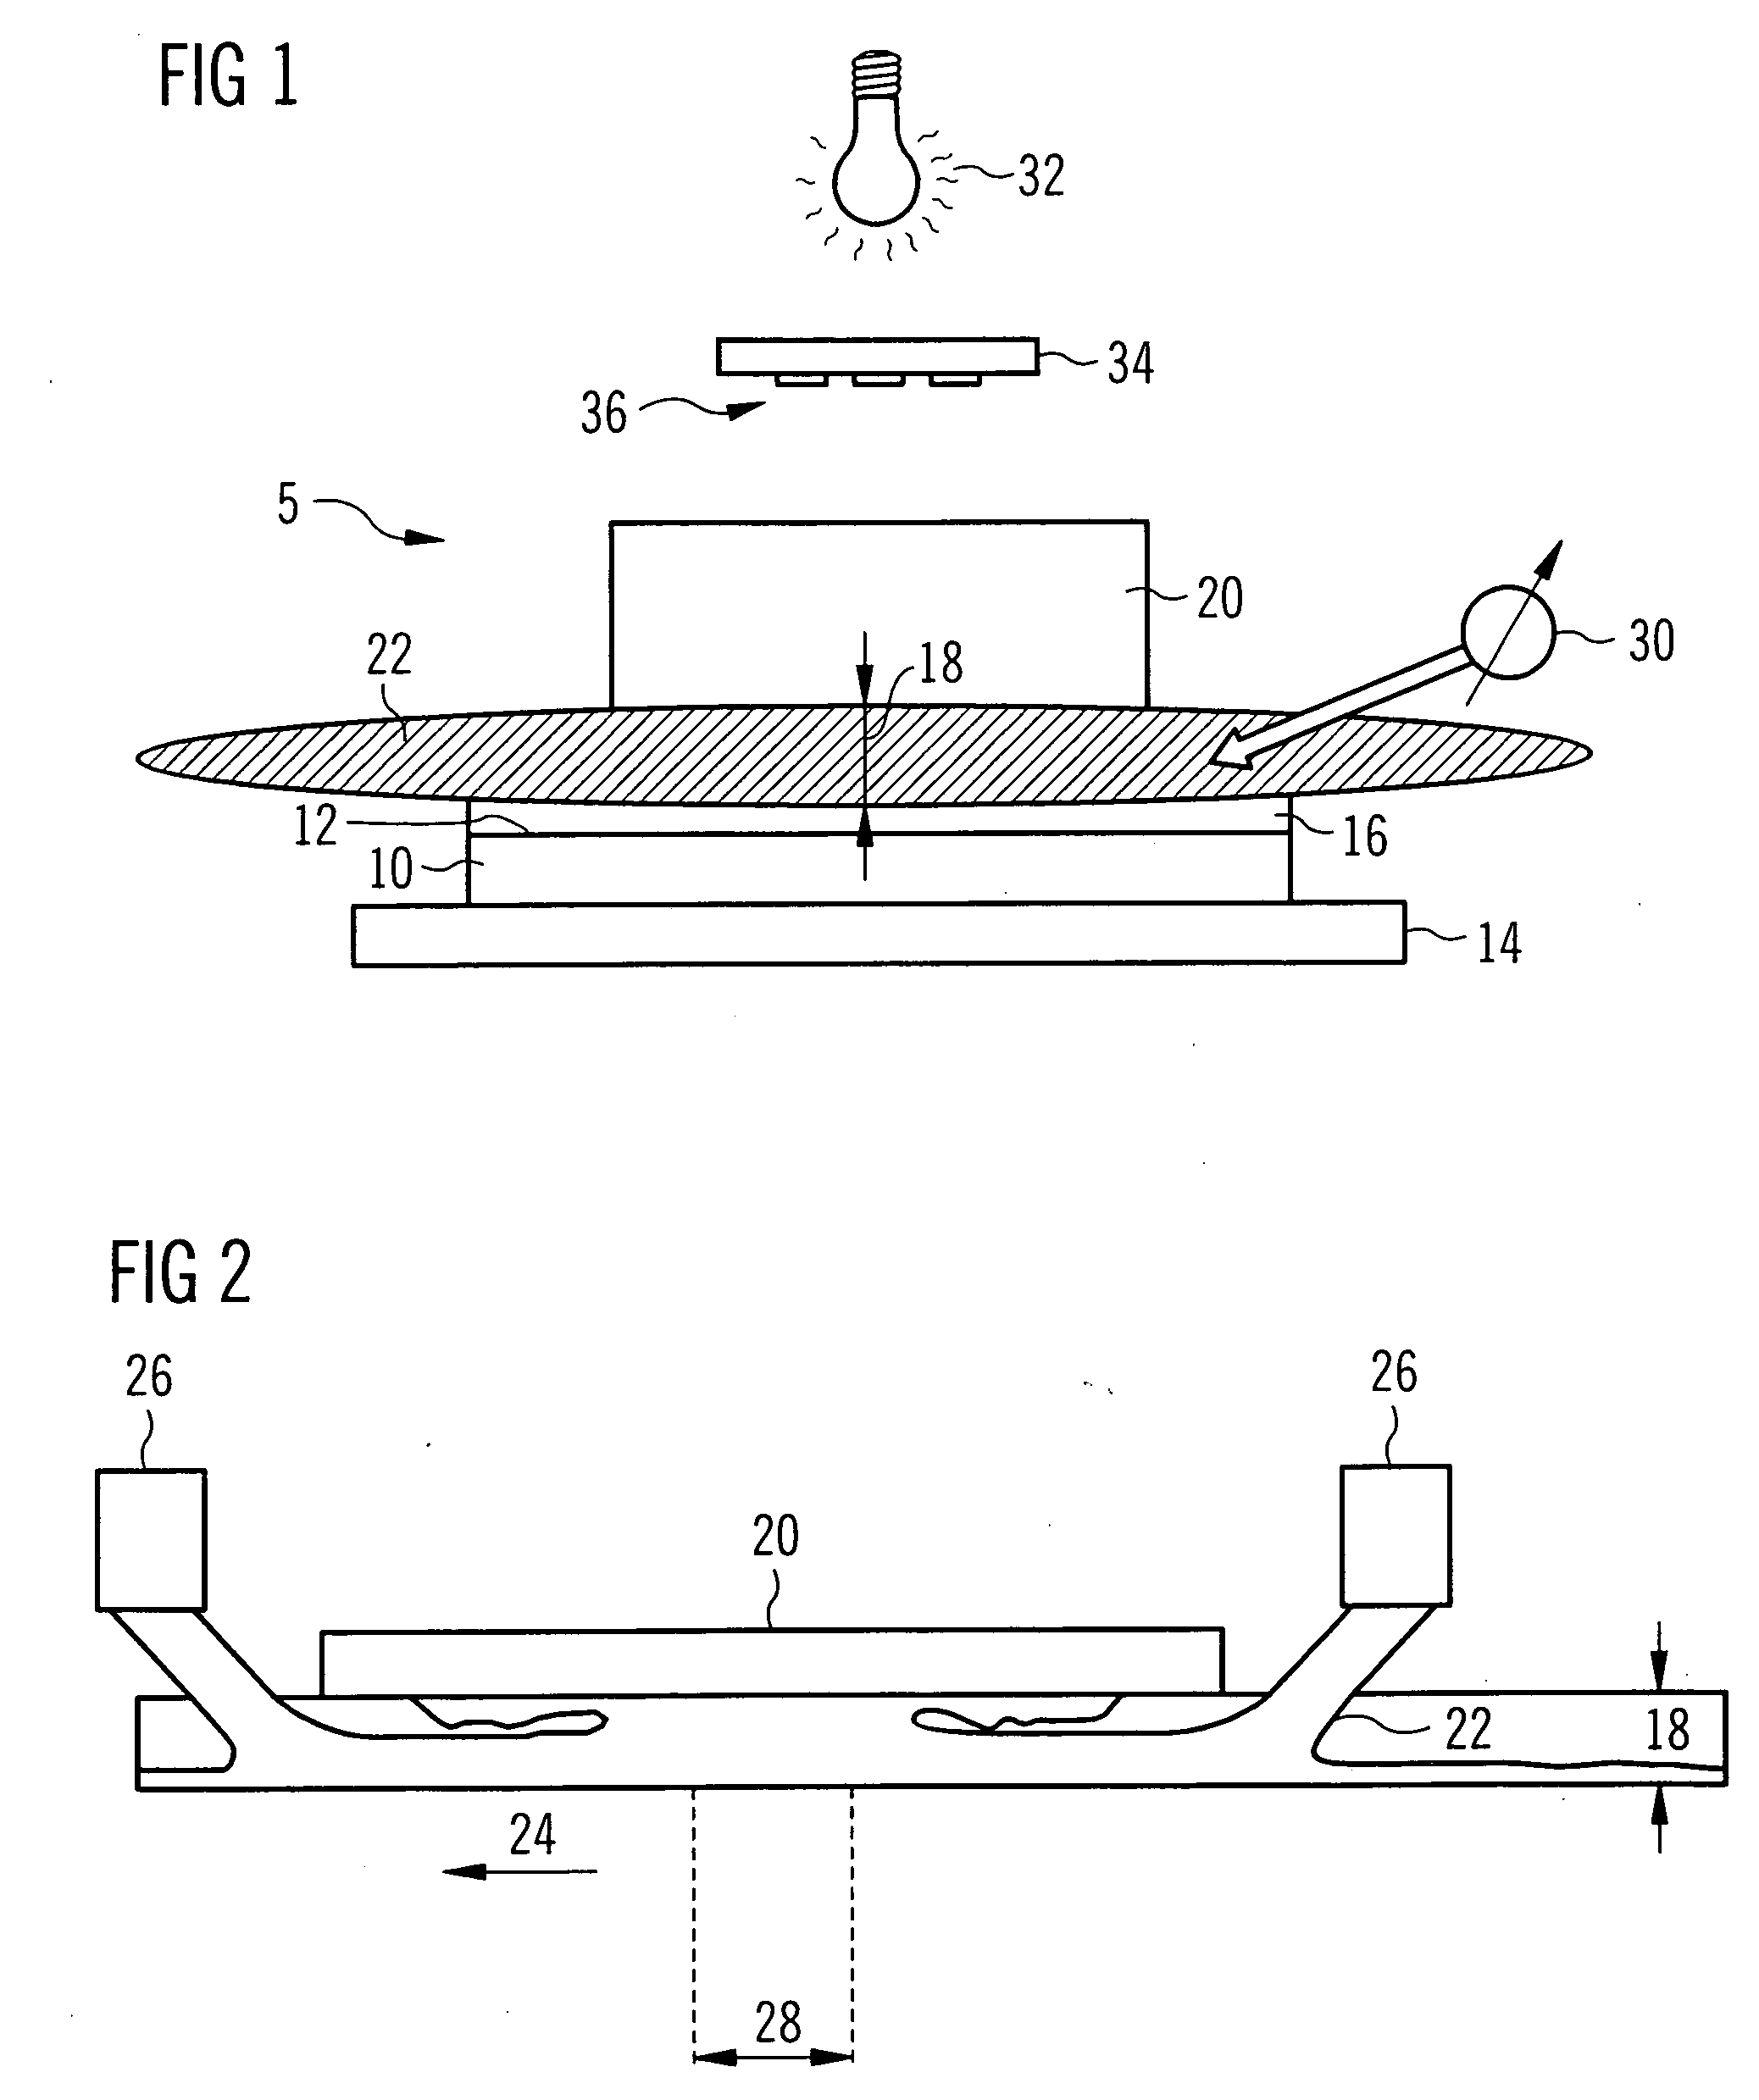 Exposure device for immersion lithography and method for monitoring parameters of an exposure device for immersion lithography